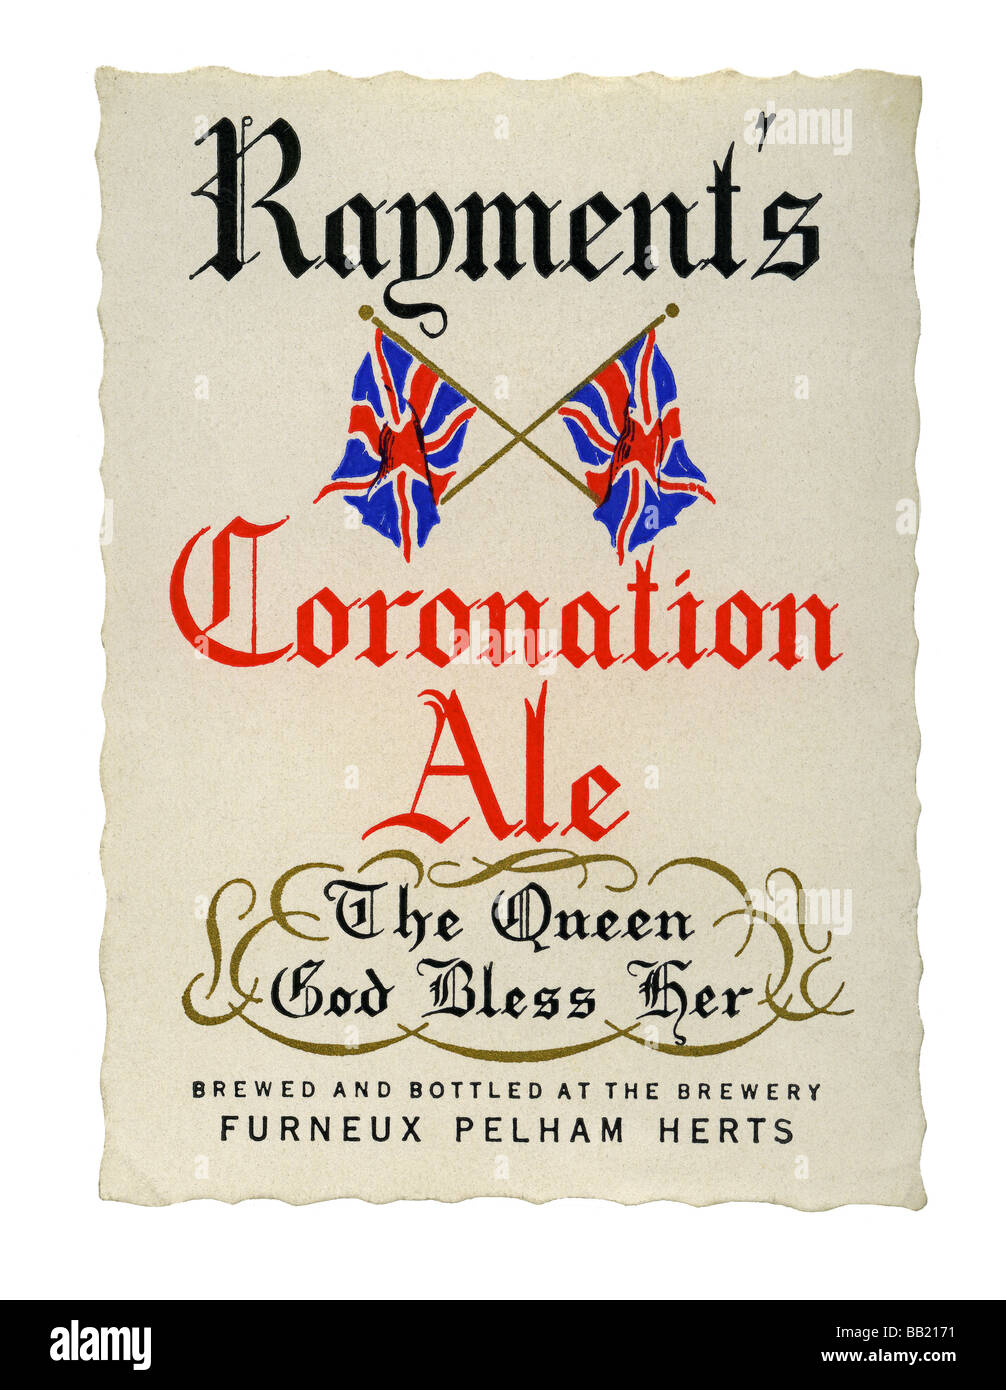 Old British beer label for Rayment's Coronation Ale, Furneux Pelham, Hertfordshire, England, 1953 Stock Photo